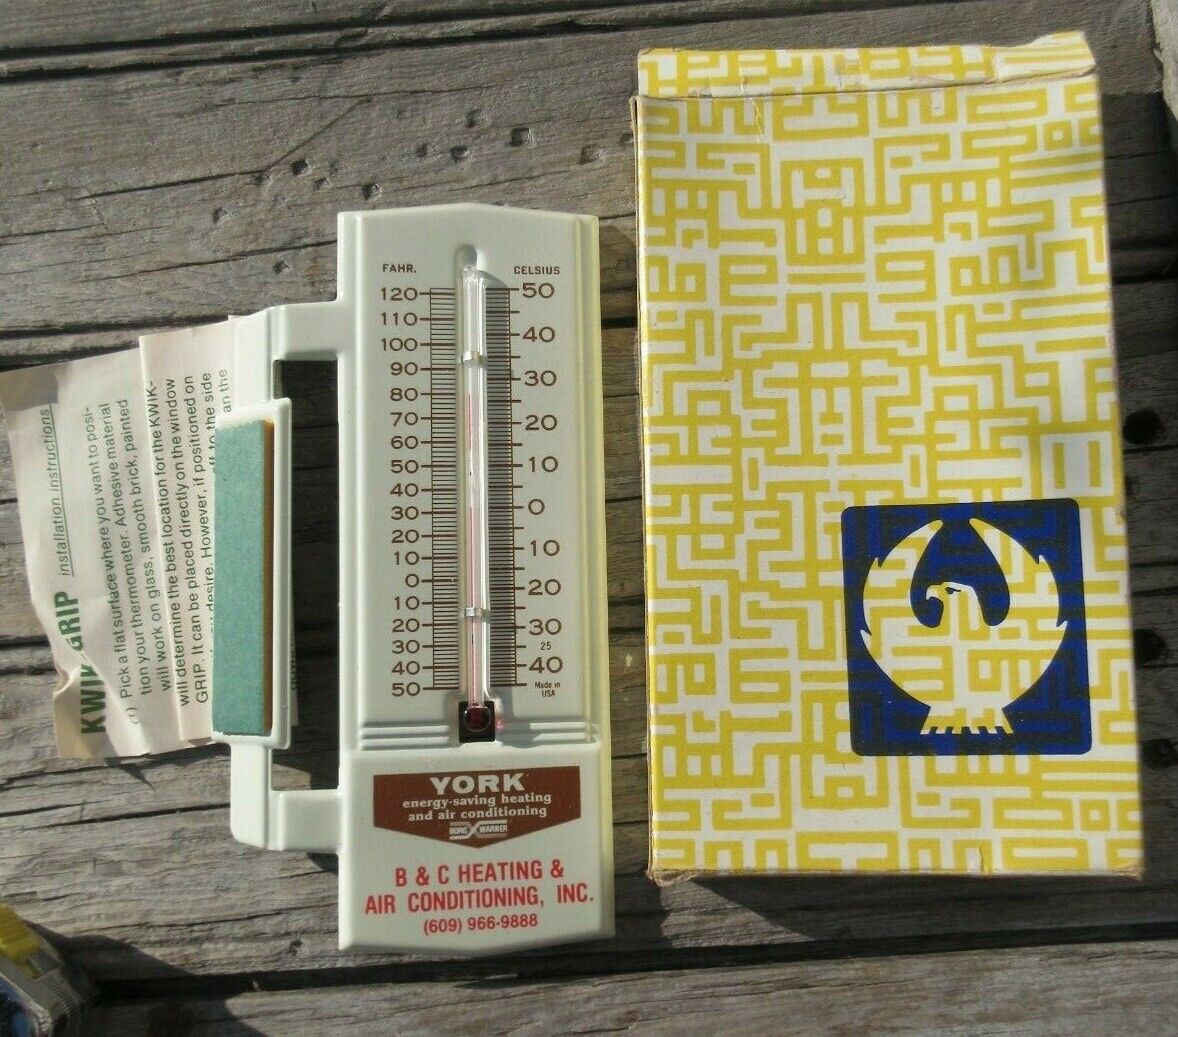 Vintage Nos York heating air condition advertisement sign thermometer USA